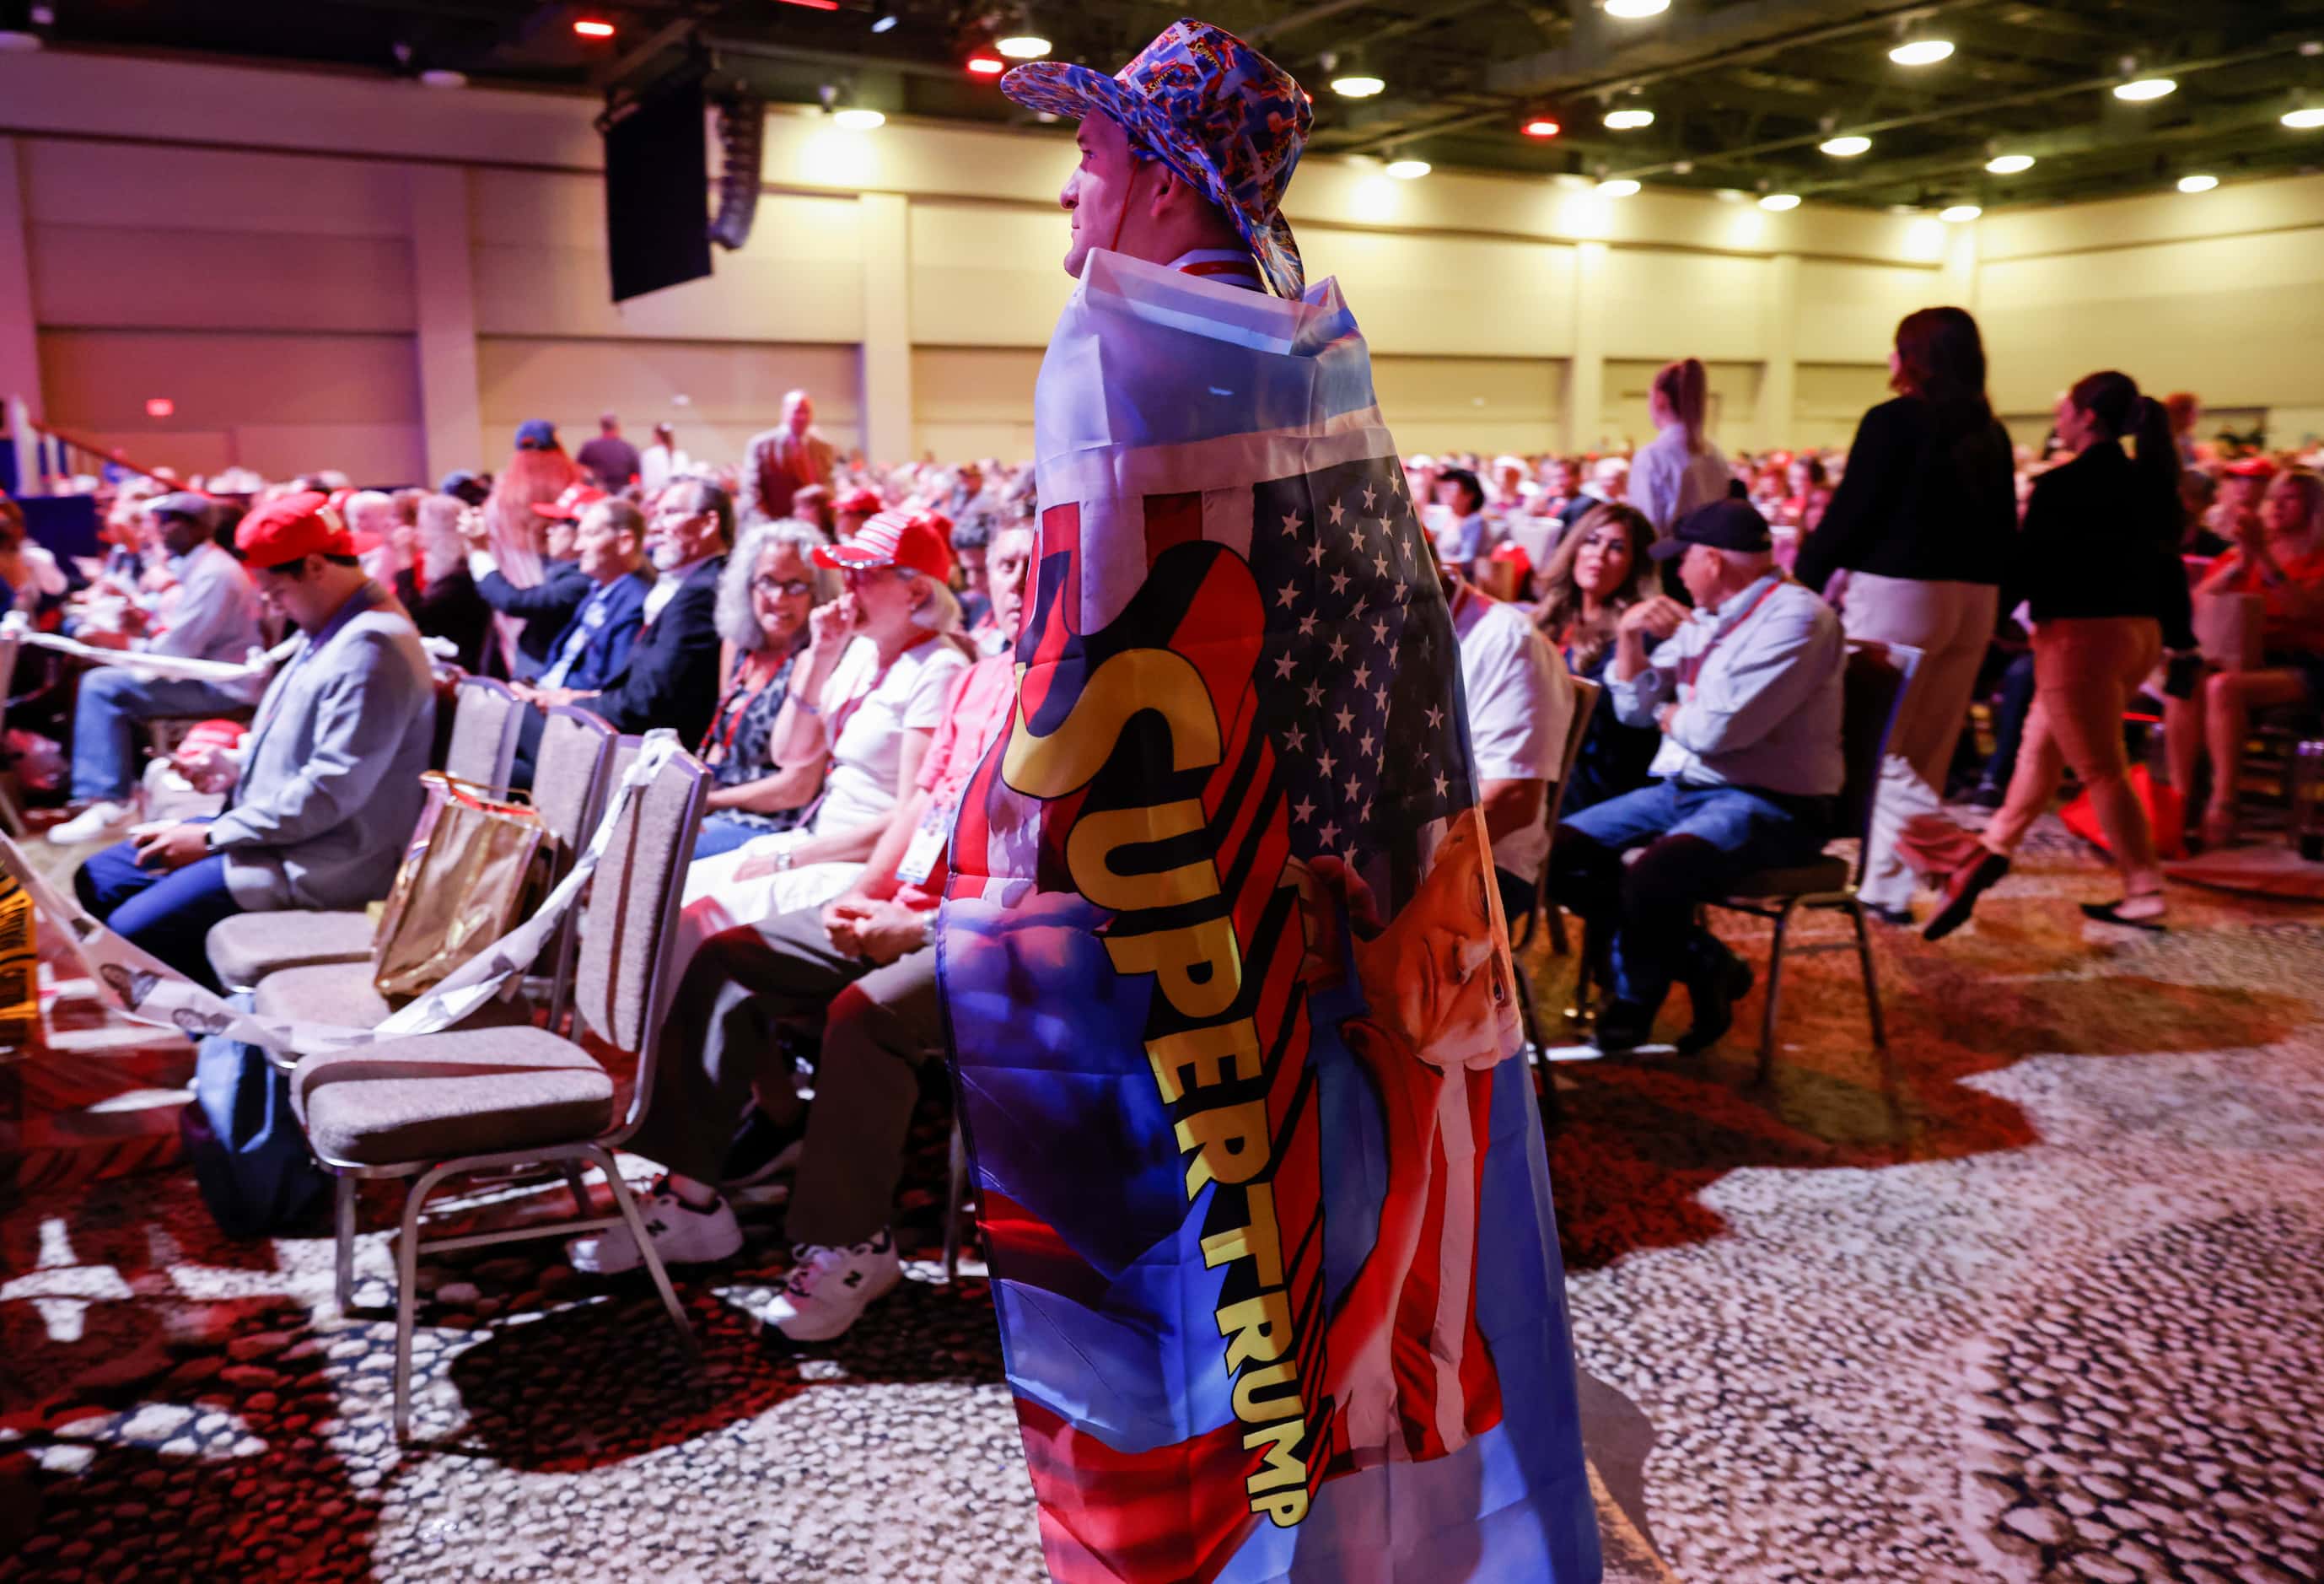 An attendee wearing cape reading “Super Trump” watches the third day of Conservative...